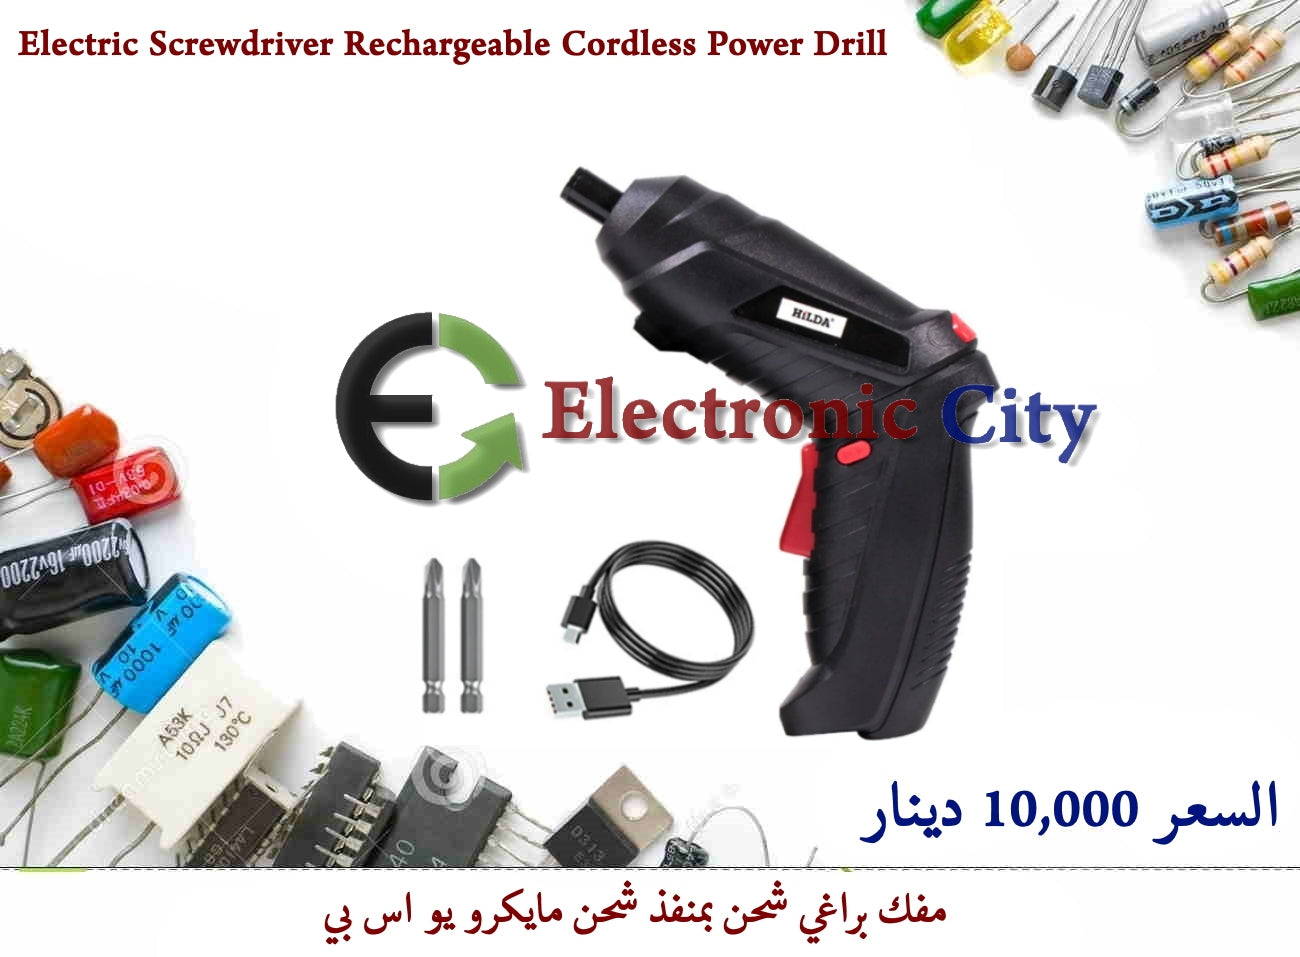 Electric Screwdriver Rechargeable Cordless Power Drill